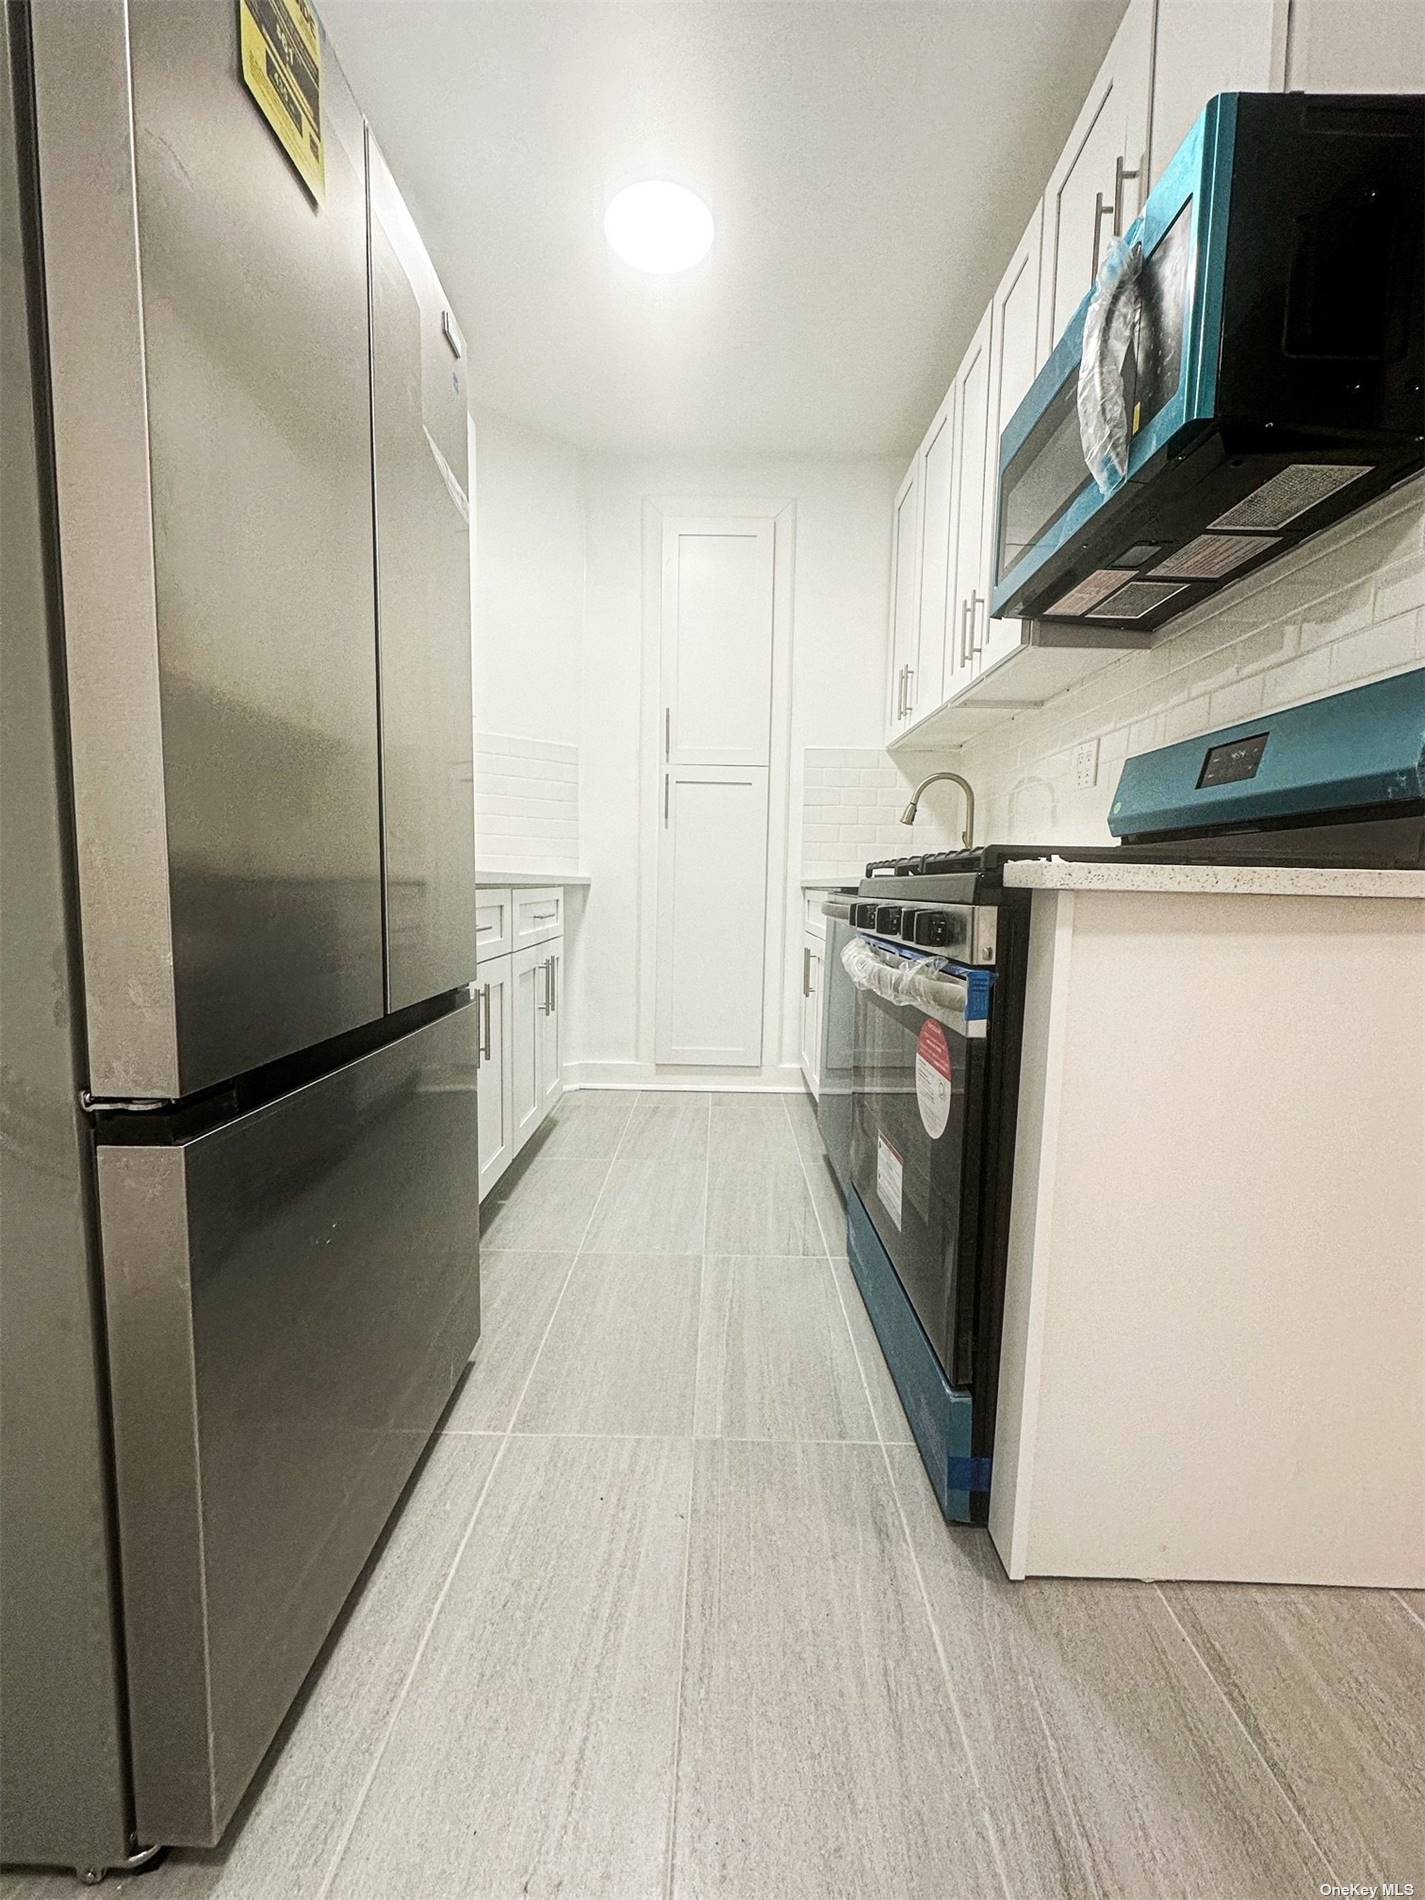 a kitchen with stainless steel appliances a refrigerator and a hard wood floor